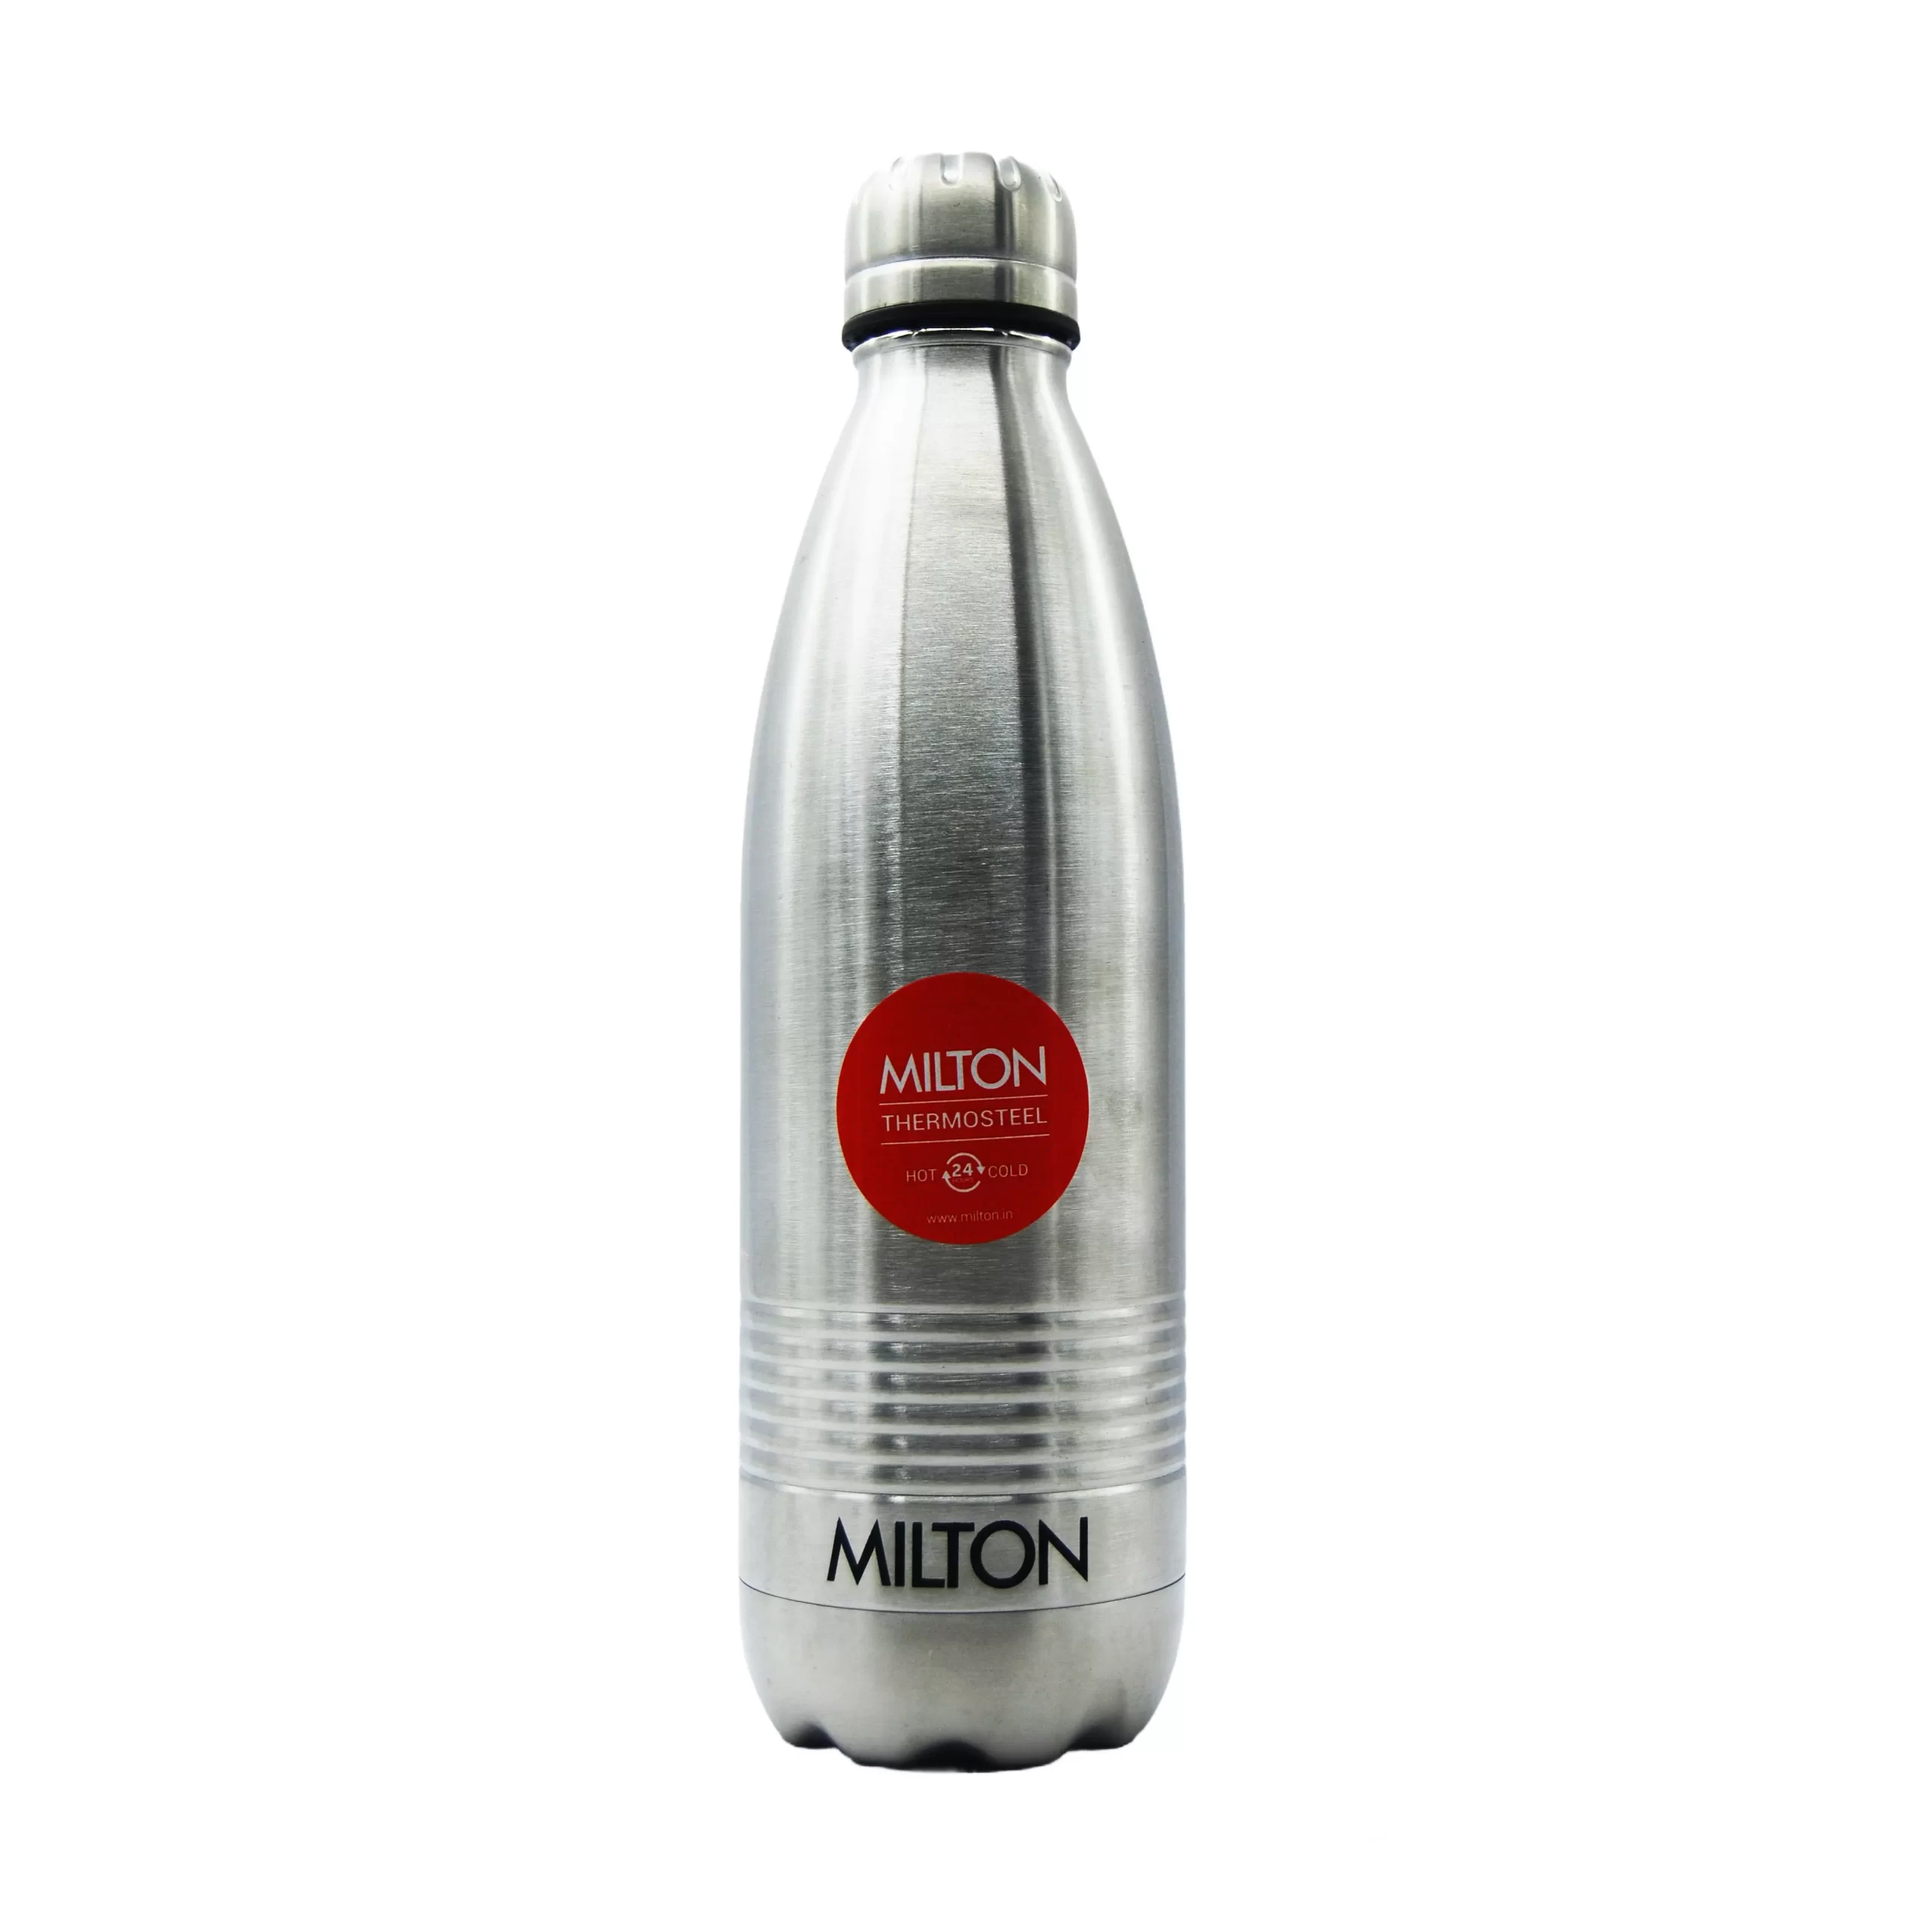 https://leletoday.in/wp-content/uploads/2022/12/Milton-Duo-DLX-750-Silver-Thermosteel-Vacuum-Insulated-Bottle-24Hours-Hot-Cold-SS304-Stainless-Steel-700ml-scaled.webp